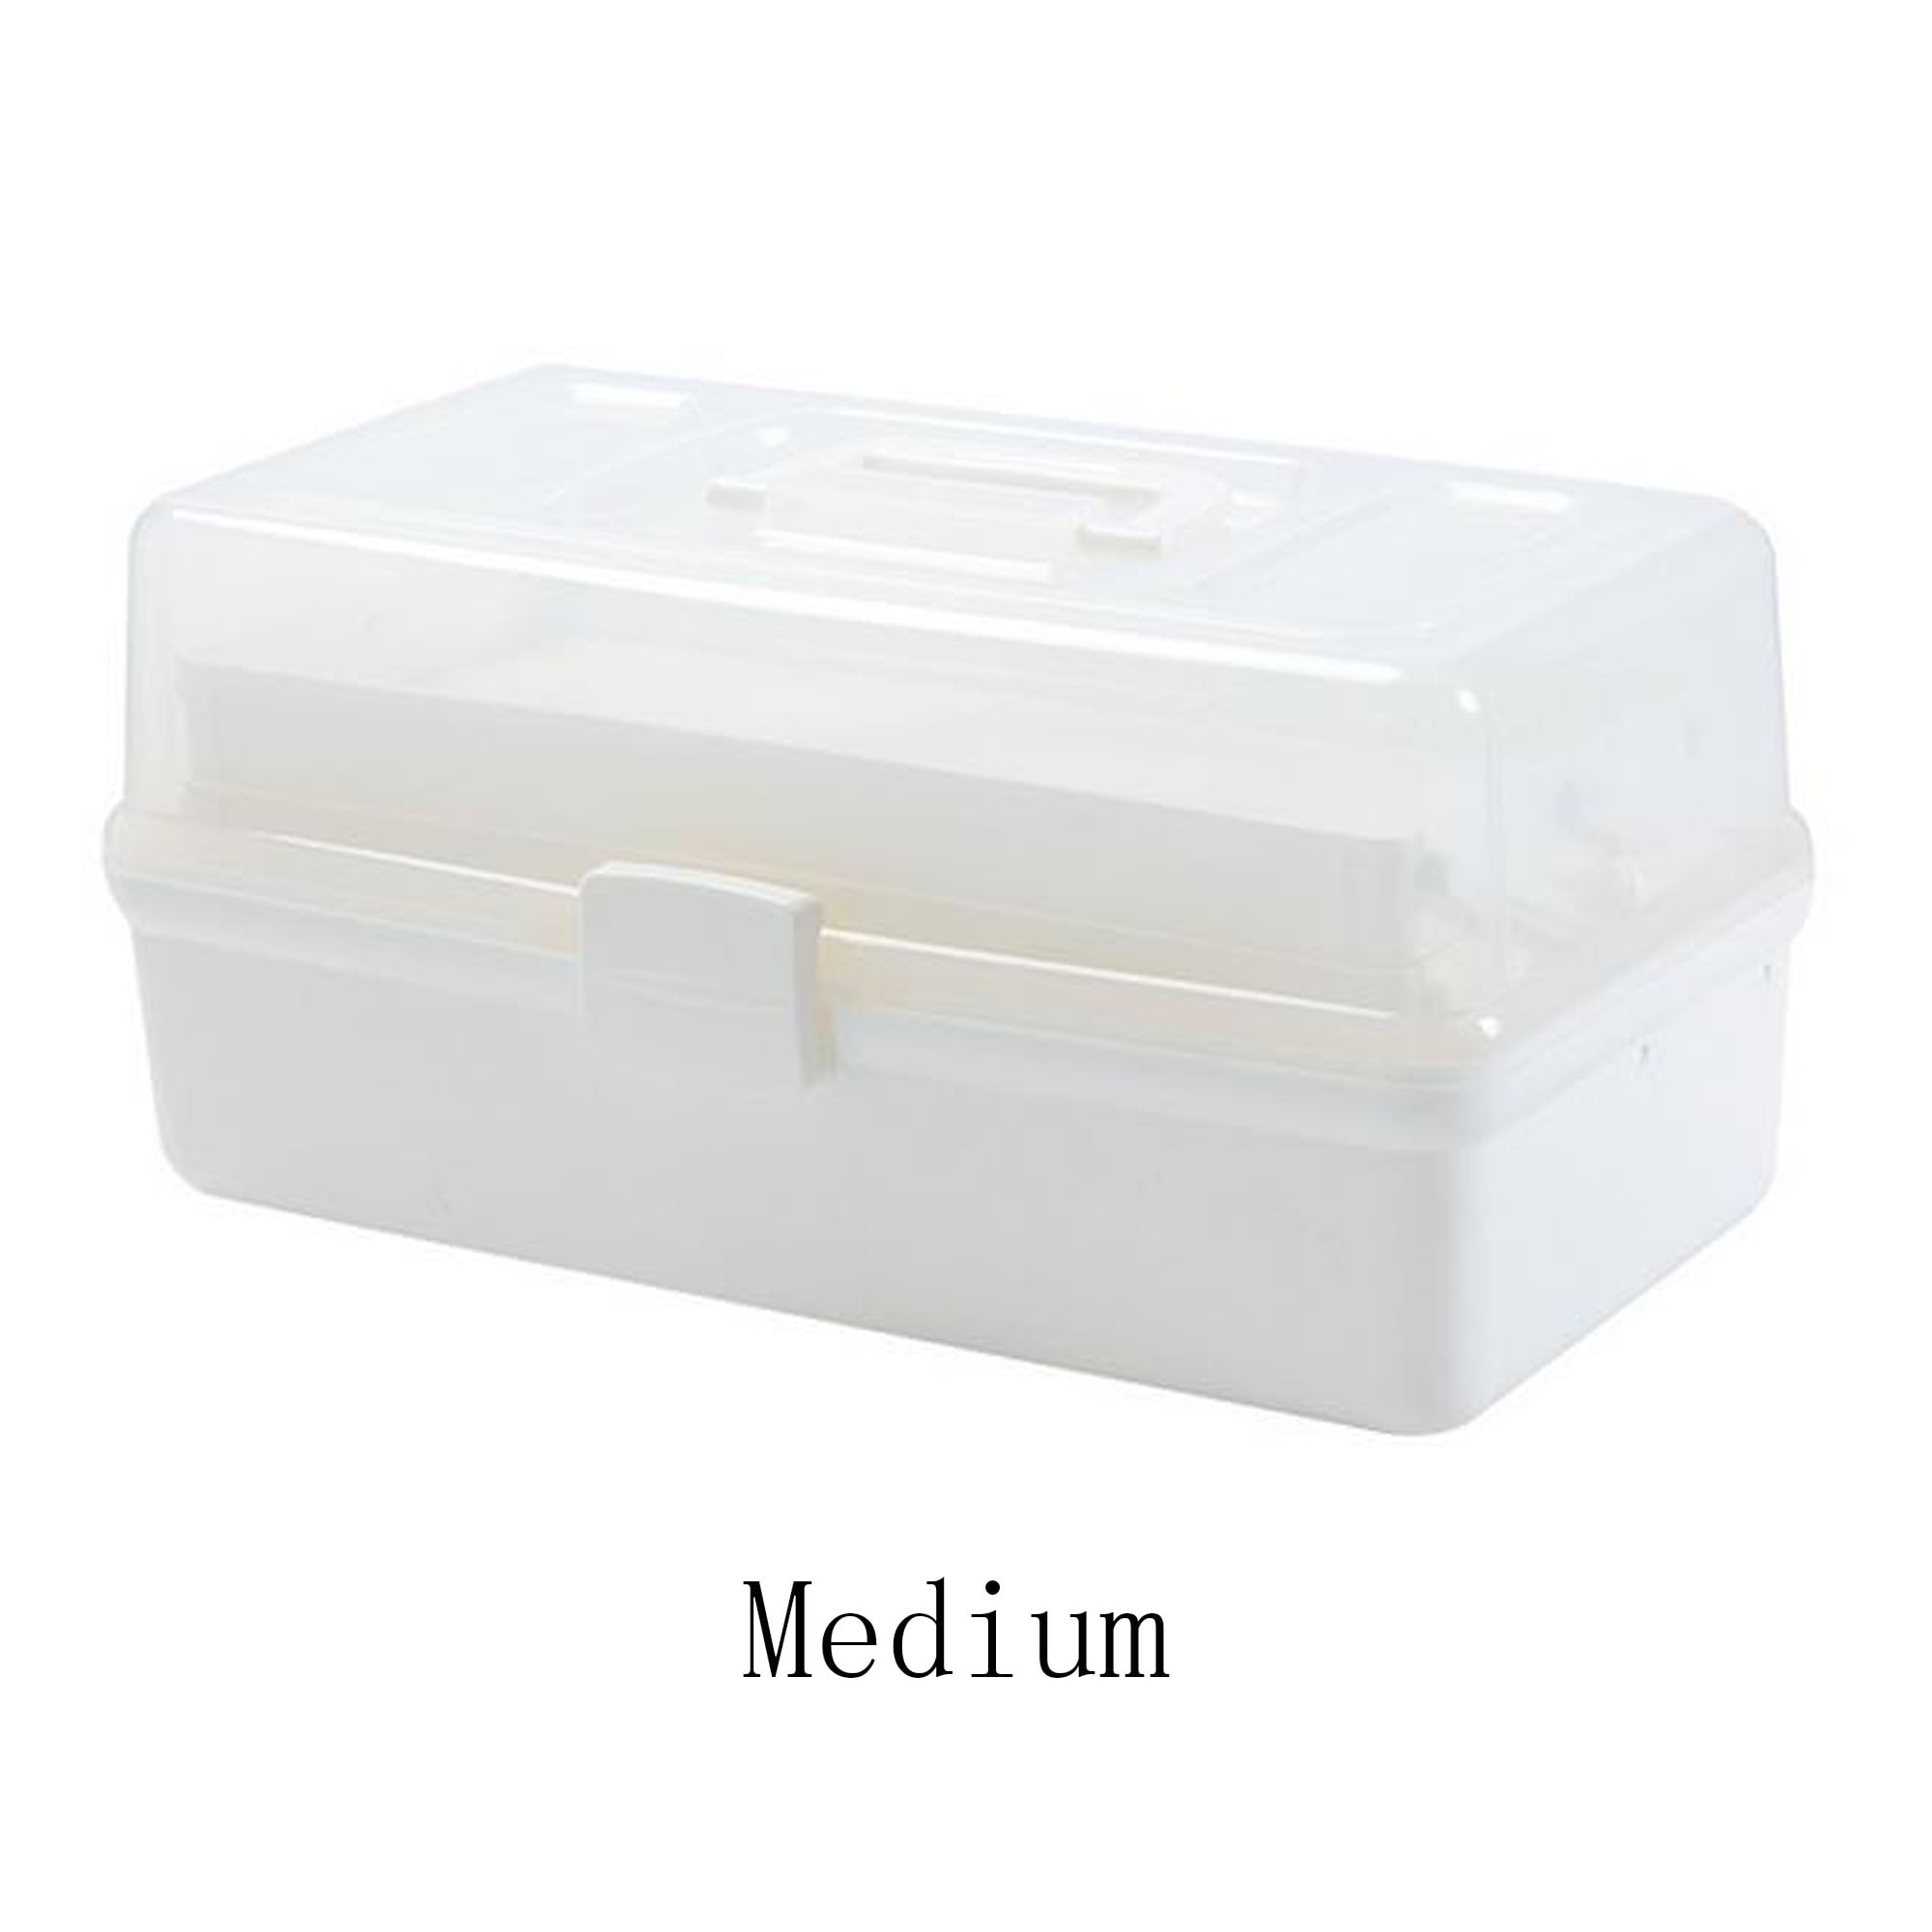 Clear First Aid Bin with Detachable Tray, Portable Emergency Kit